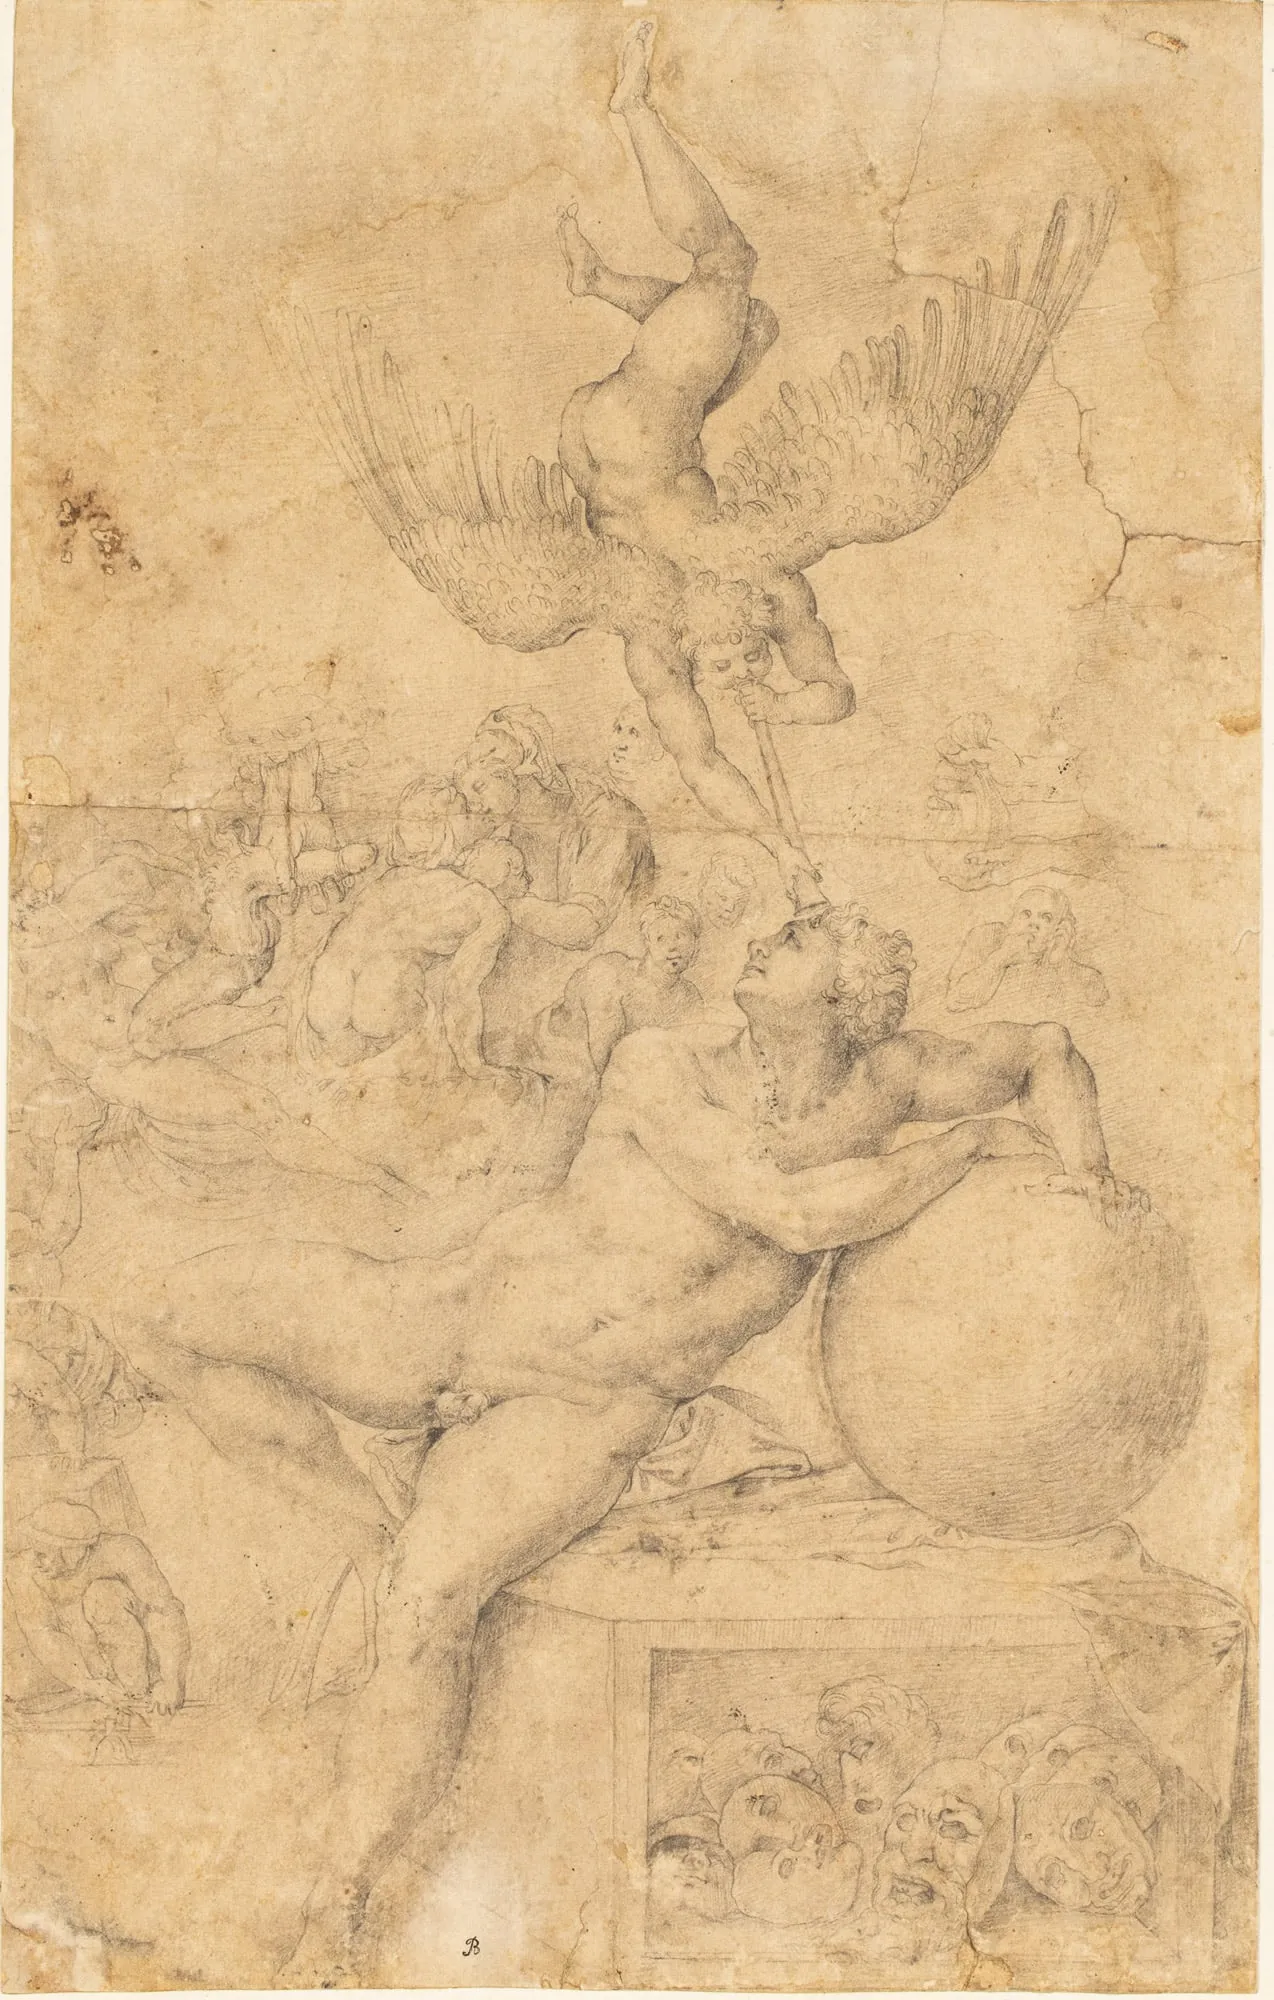 Old Master drawing based on a Michelangelo work earns $21,000 at Everard